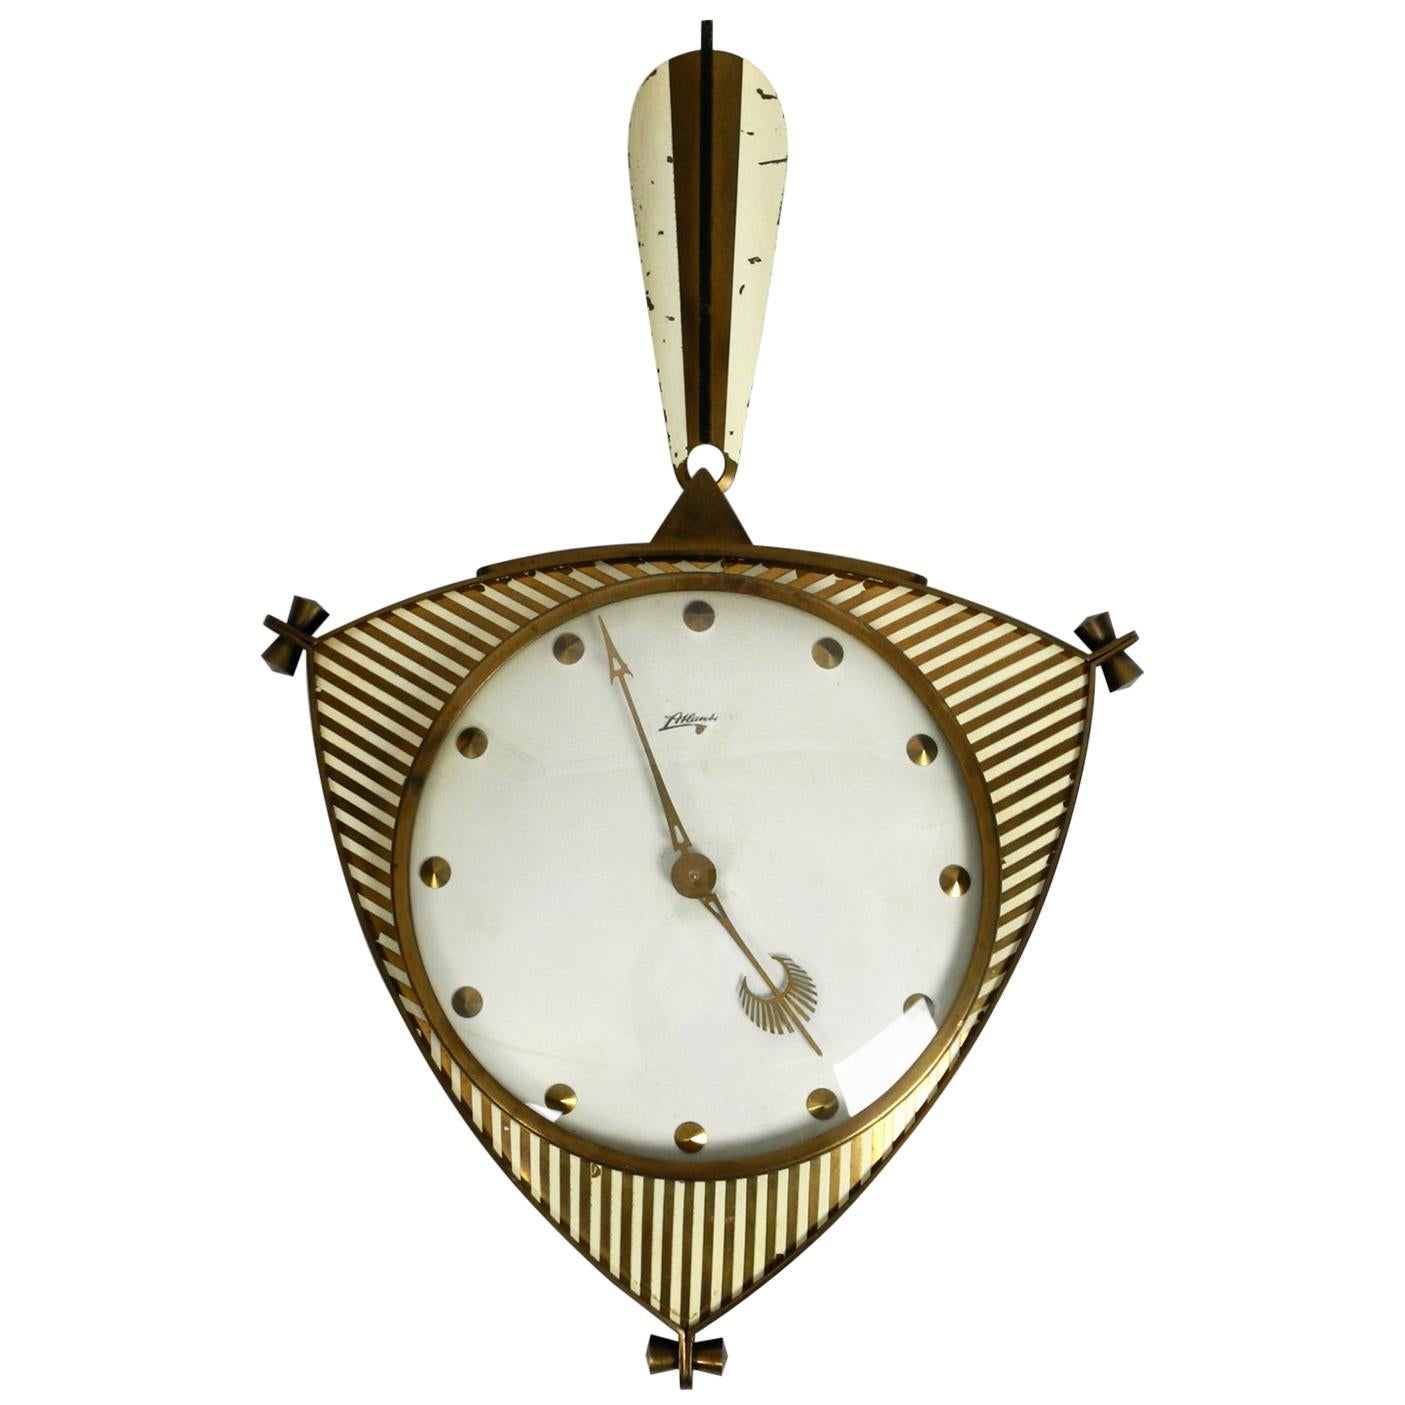 Midcentury Mechanical Atlanta Wall Clock with 10 Days Movement and with Gong